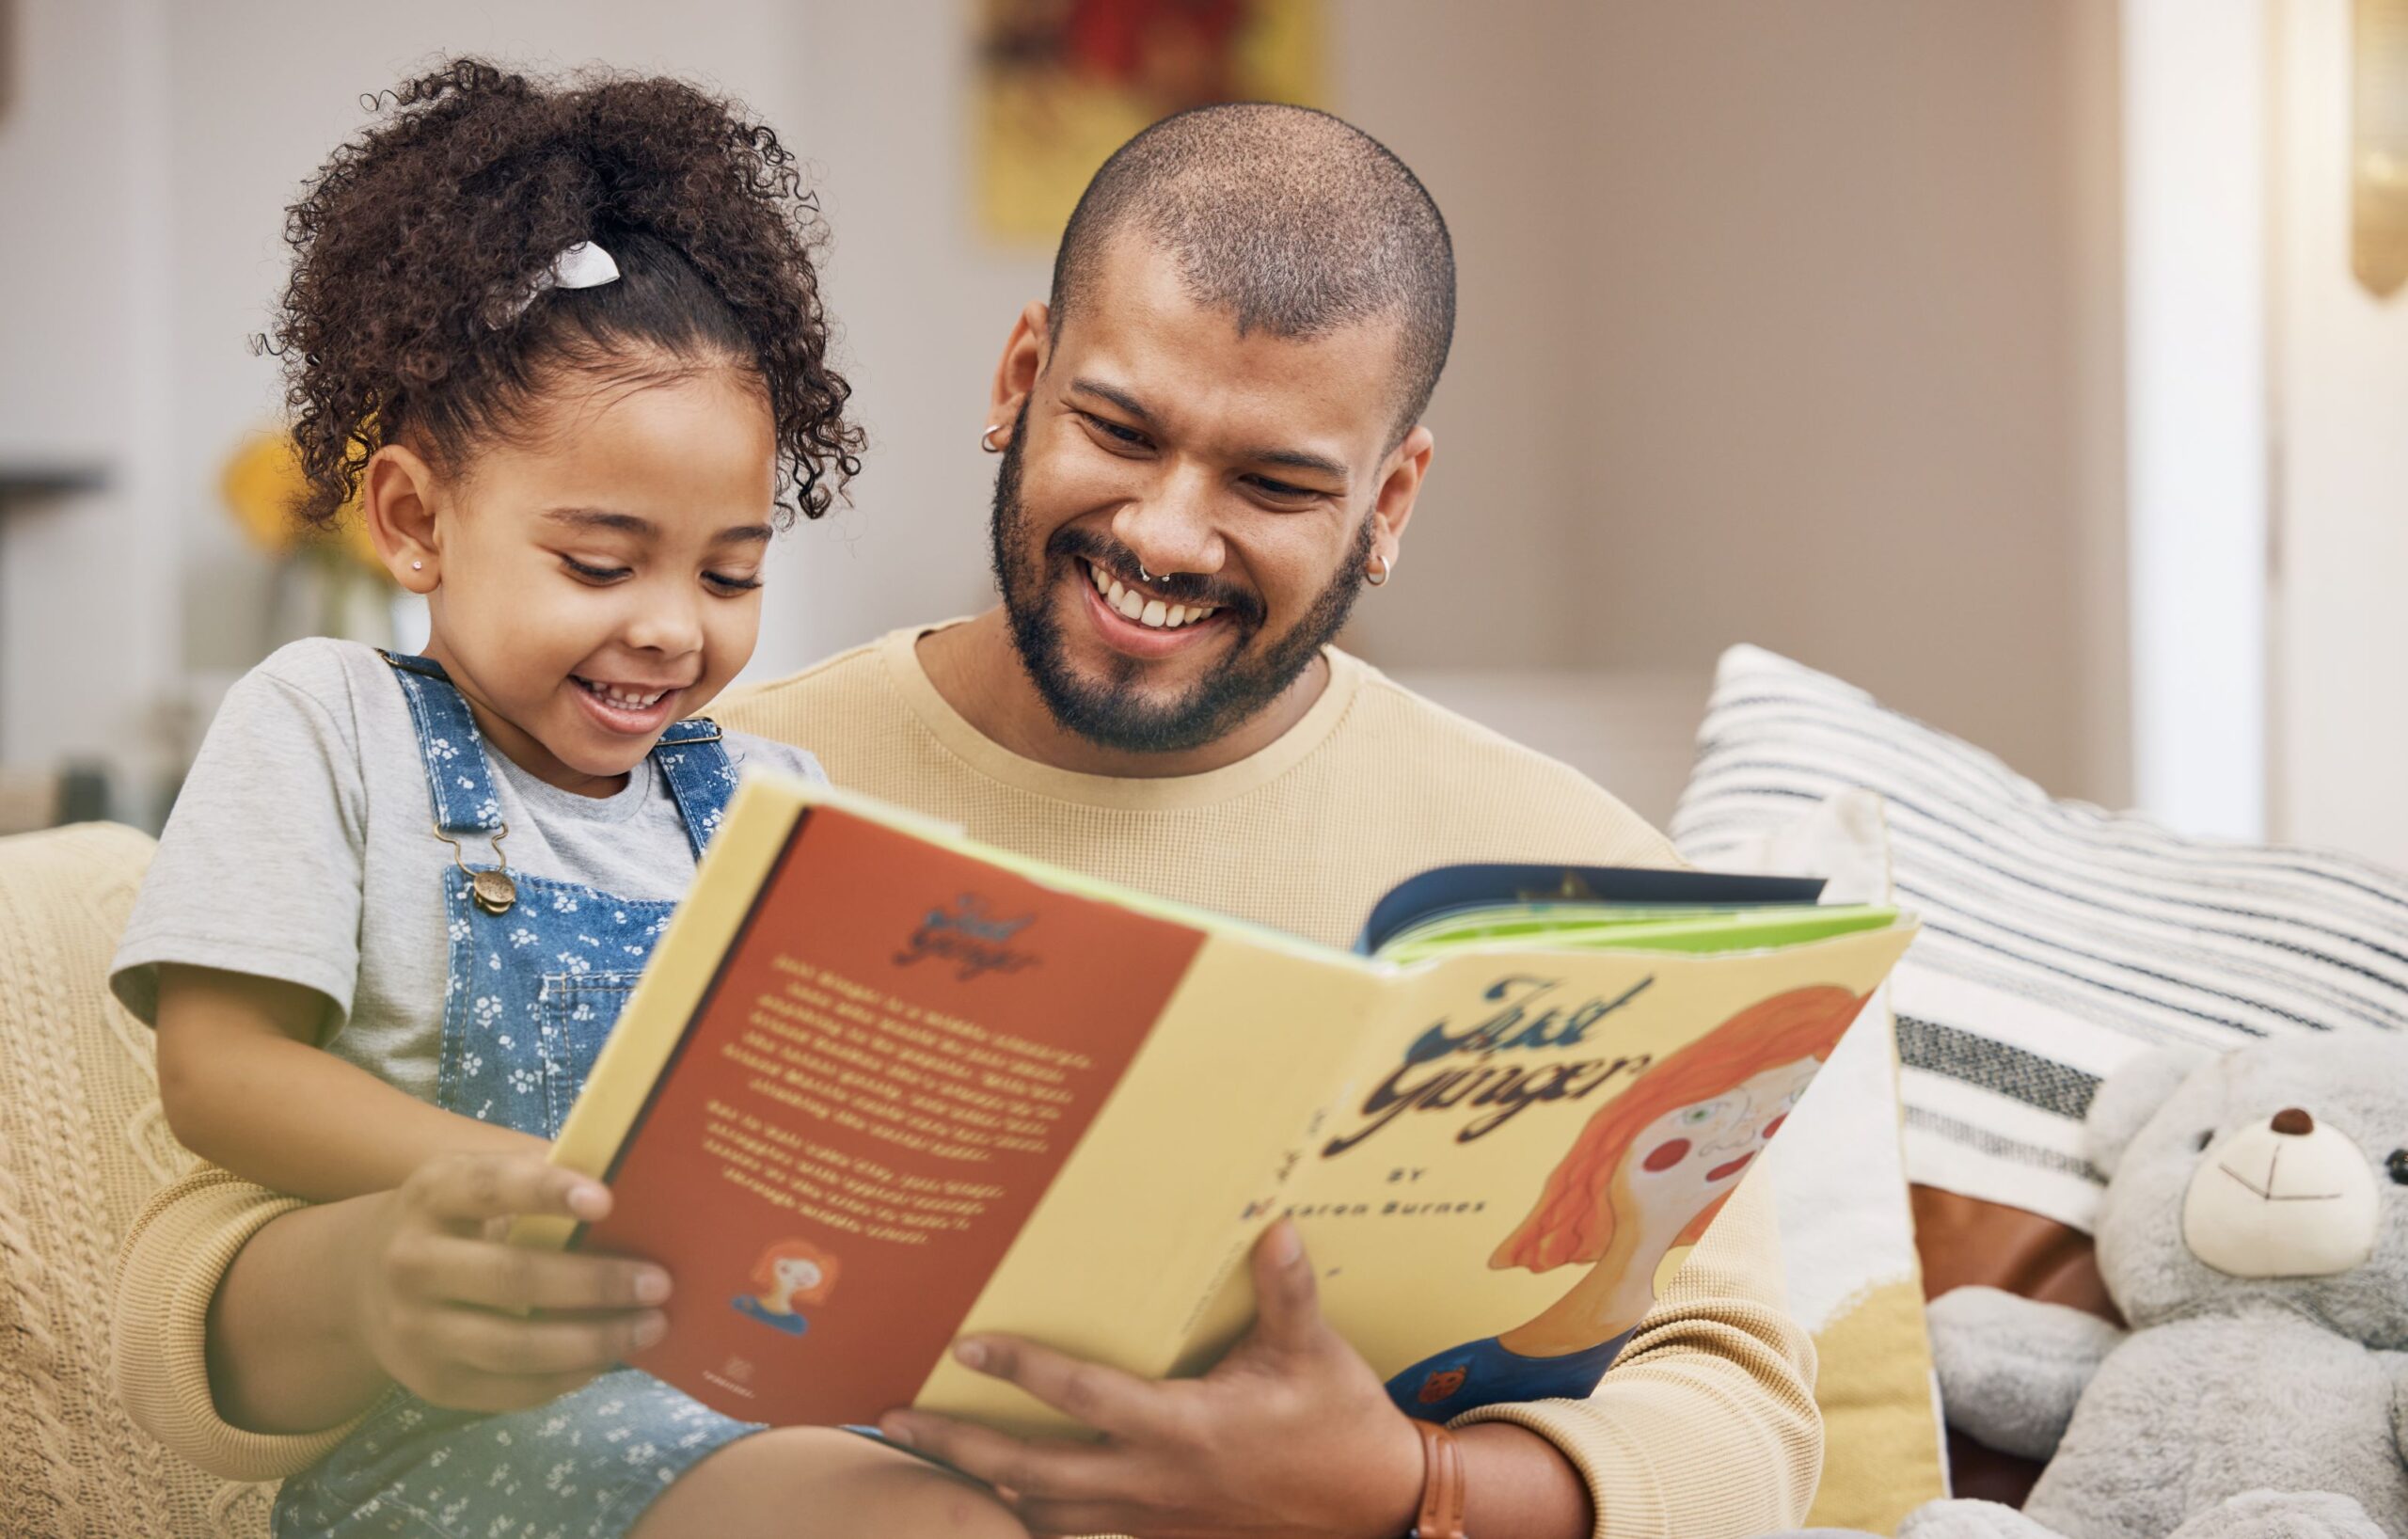 12 Shared Reading Tips to Share with Families